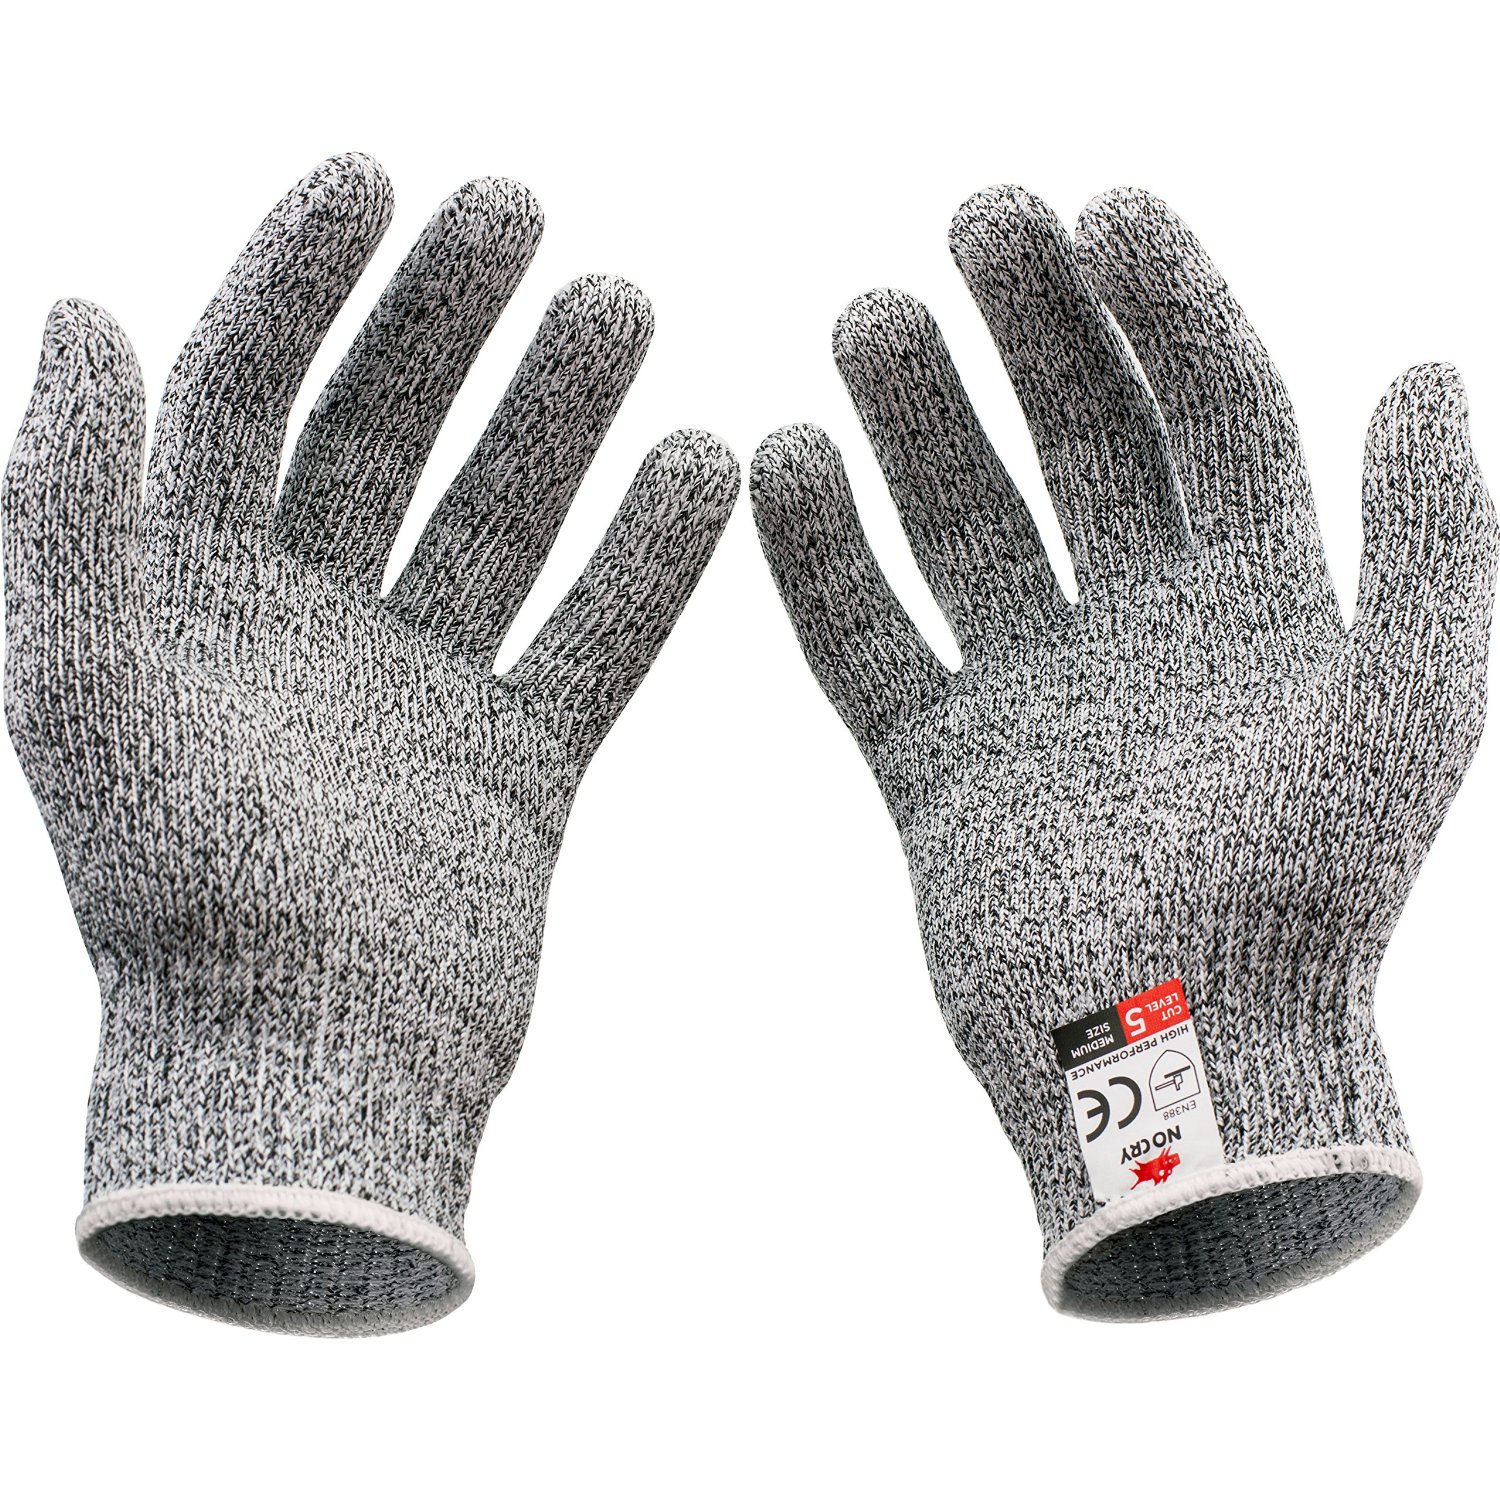 safety gloves for cutting